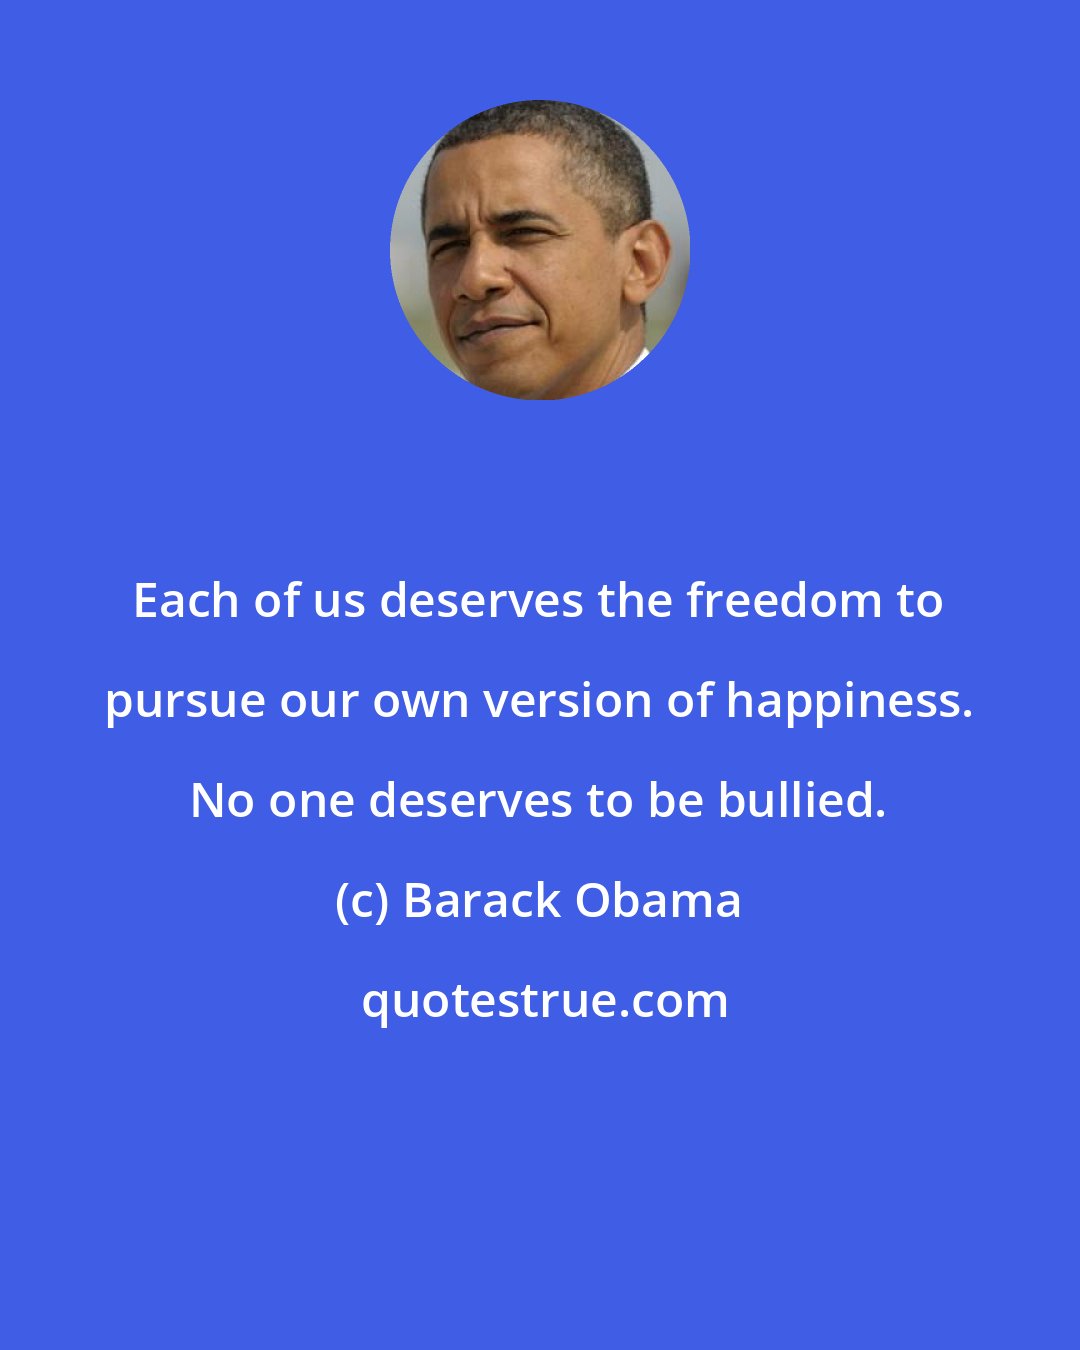 Barack Obama: Each of us deserves the freedom to pursue our own version of happiness. No one deserves to be bullied.